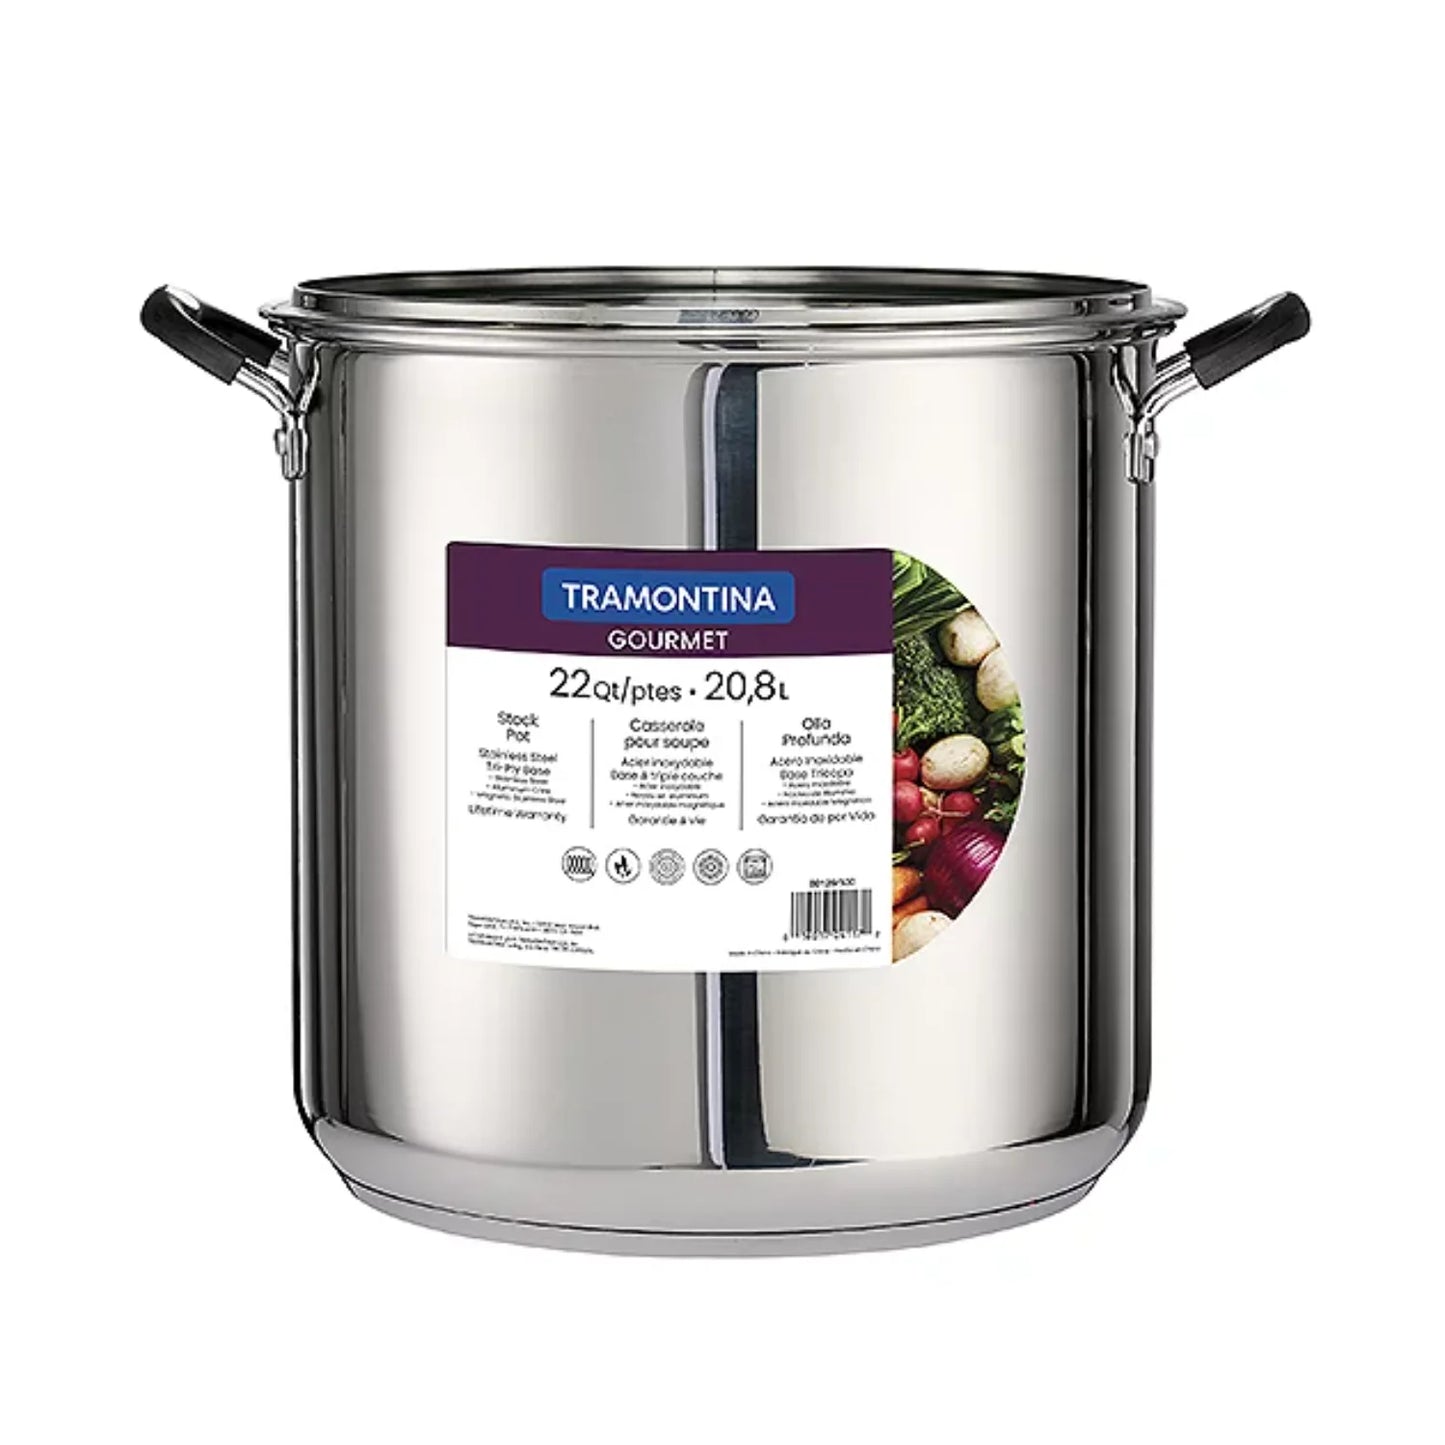 Stainless Steel Covered Stock Pot